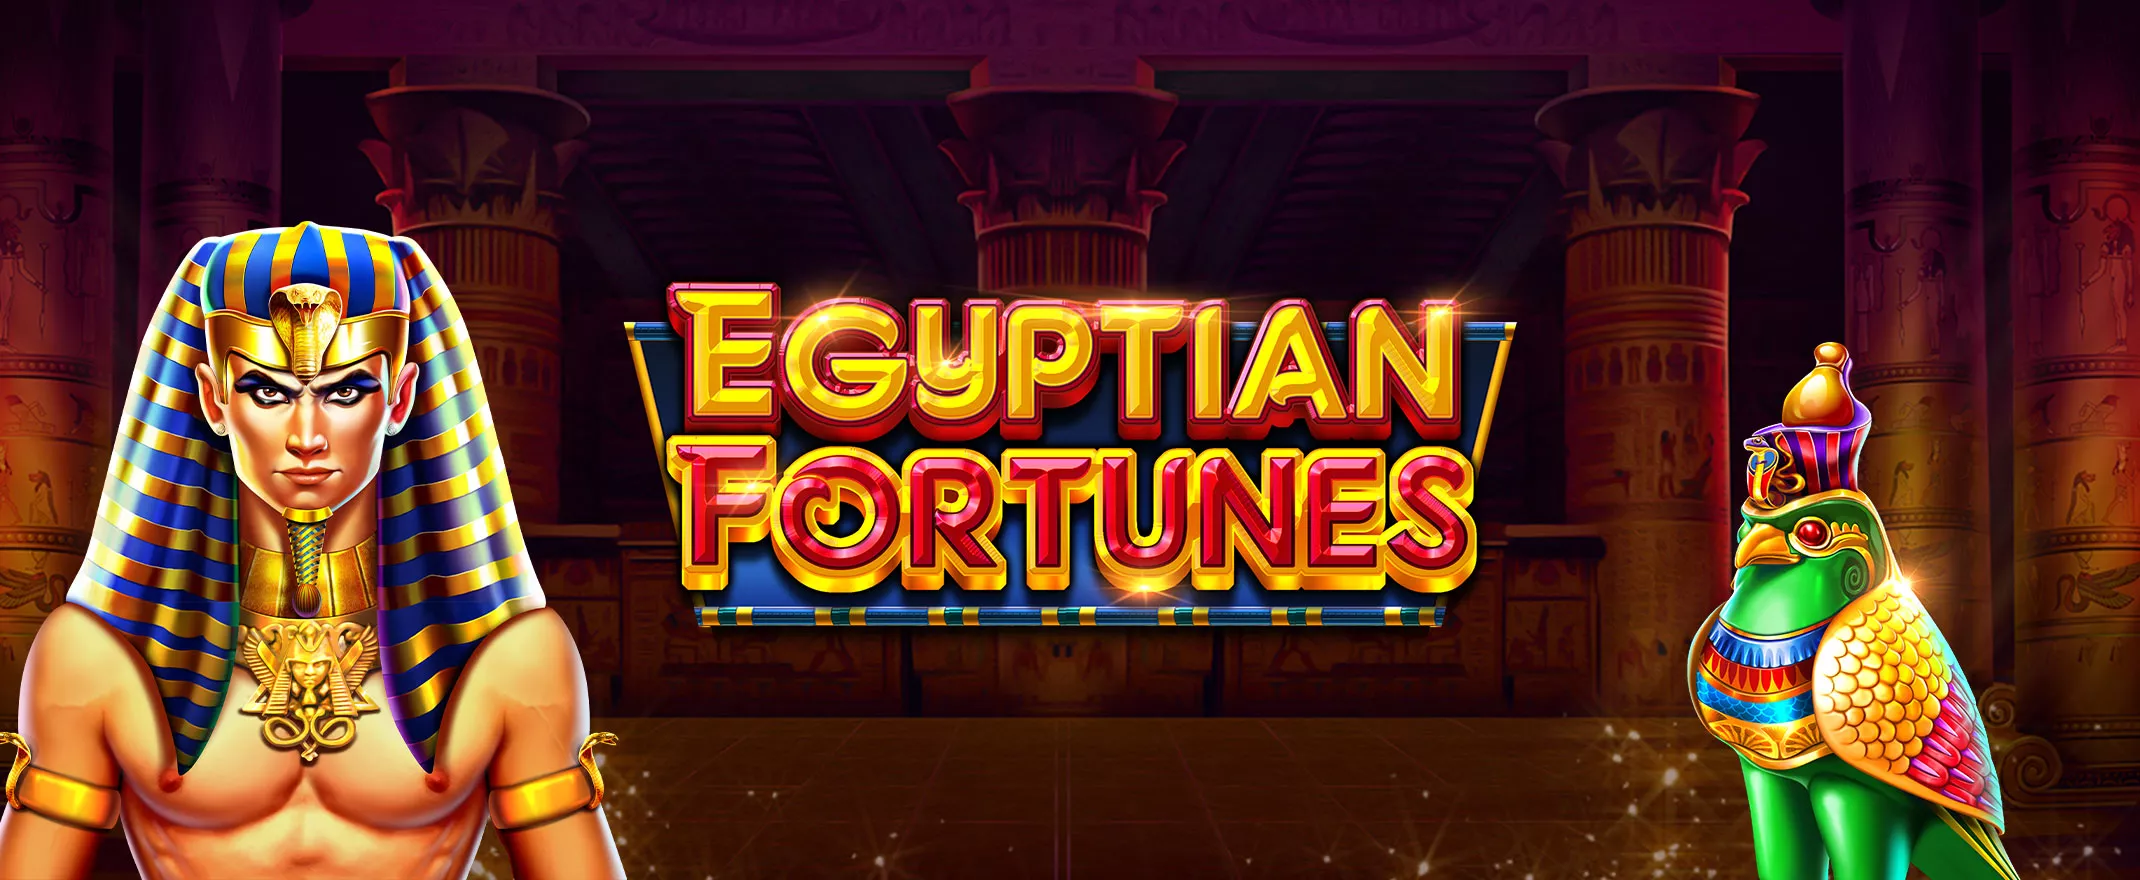 Egyptian Fortunes video slot